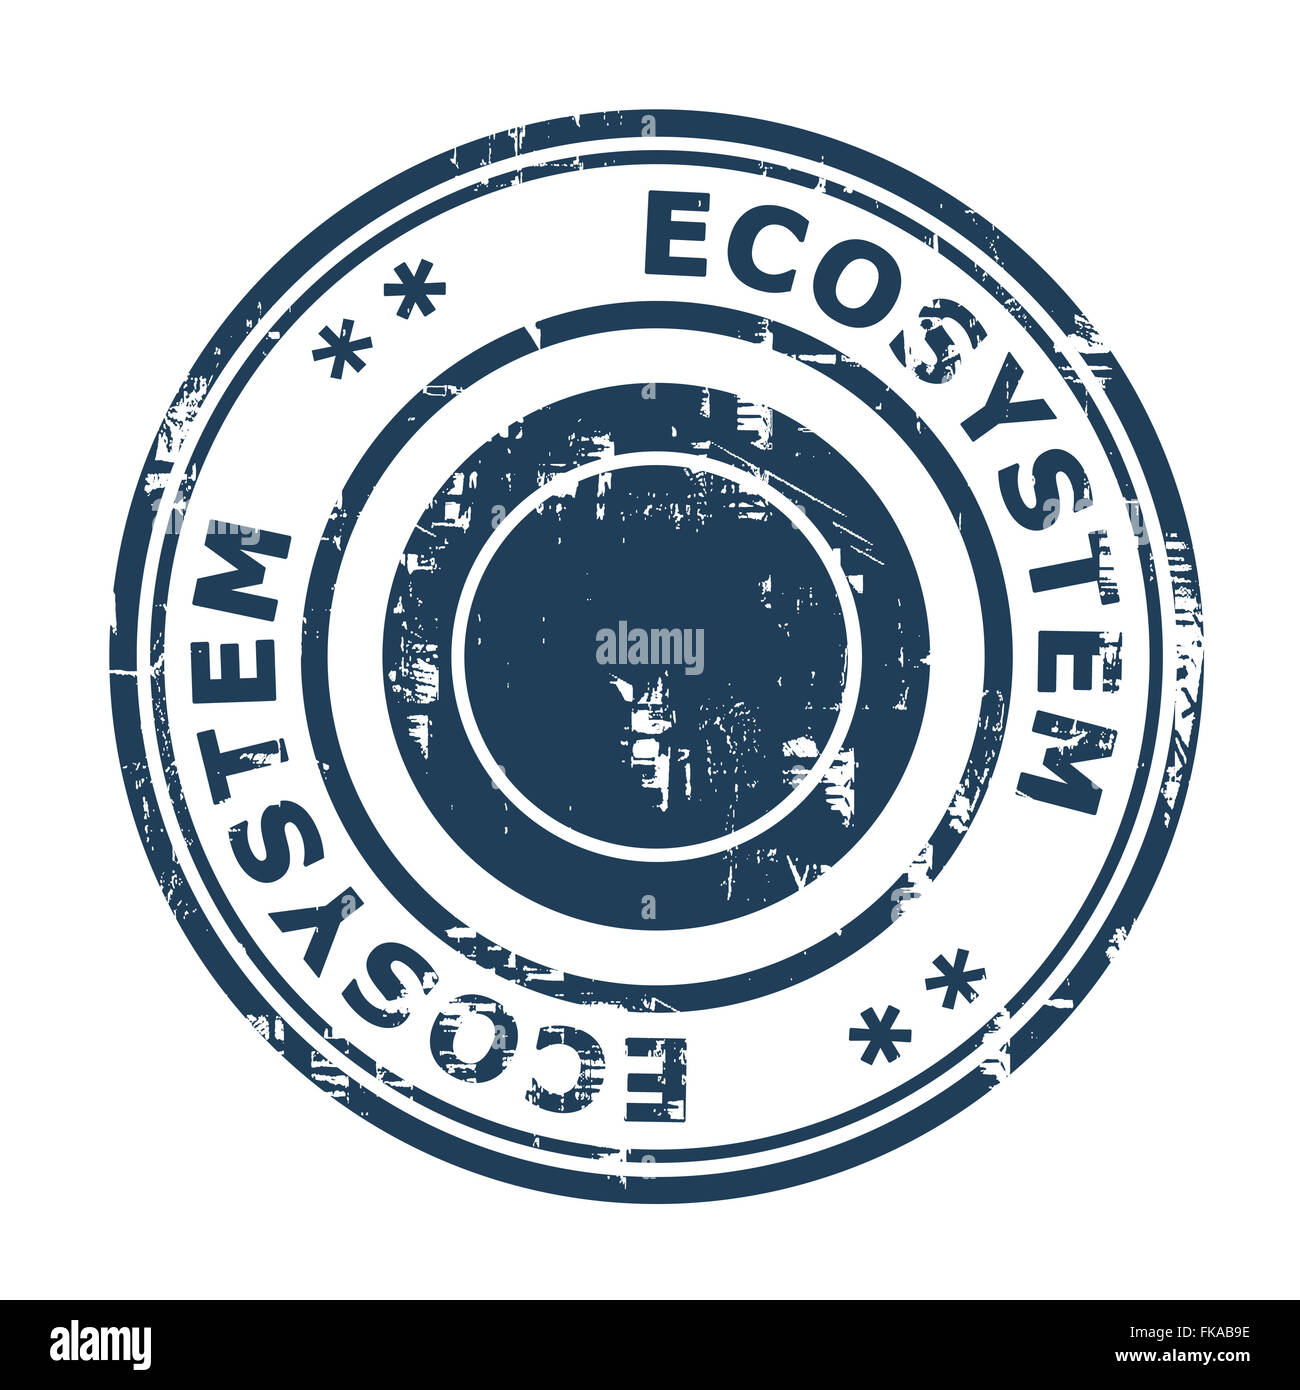 Ecosystem business concept rubber stamp isolated on a white background. Stock Photo